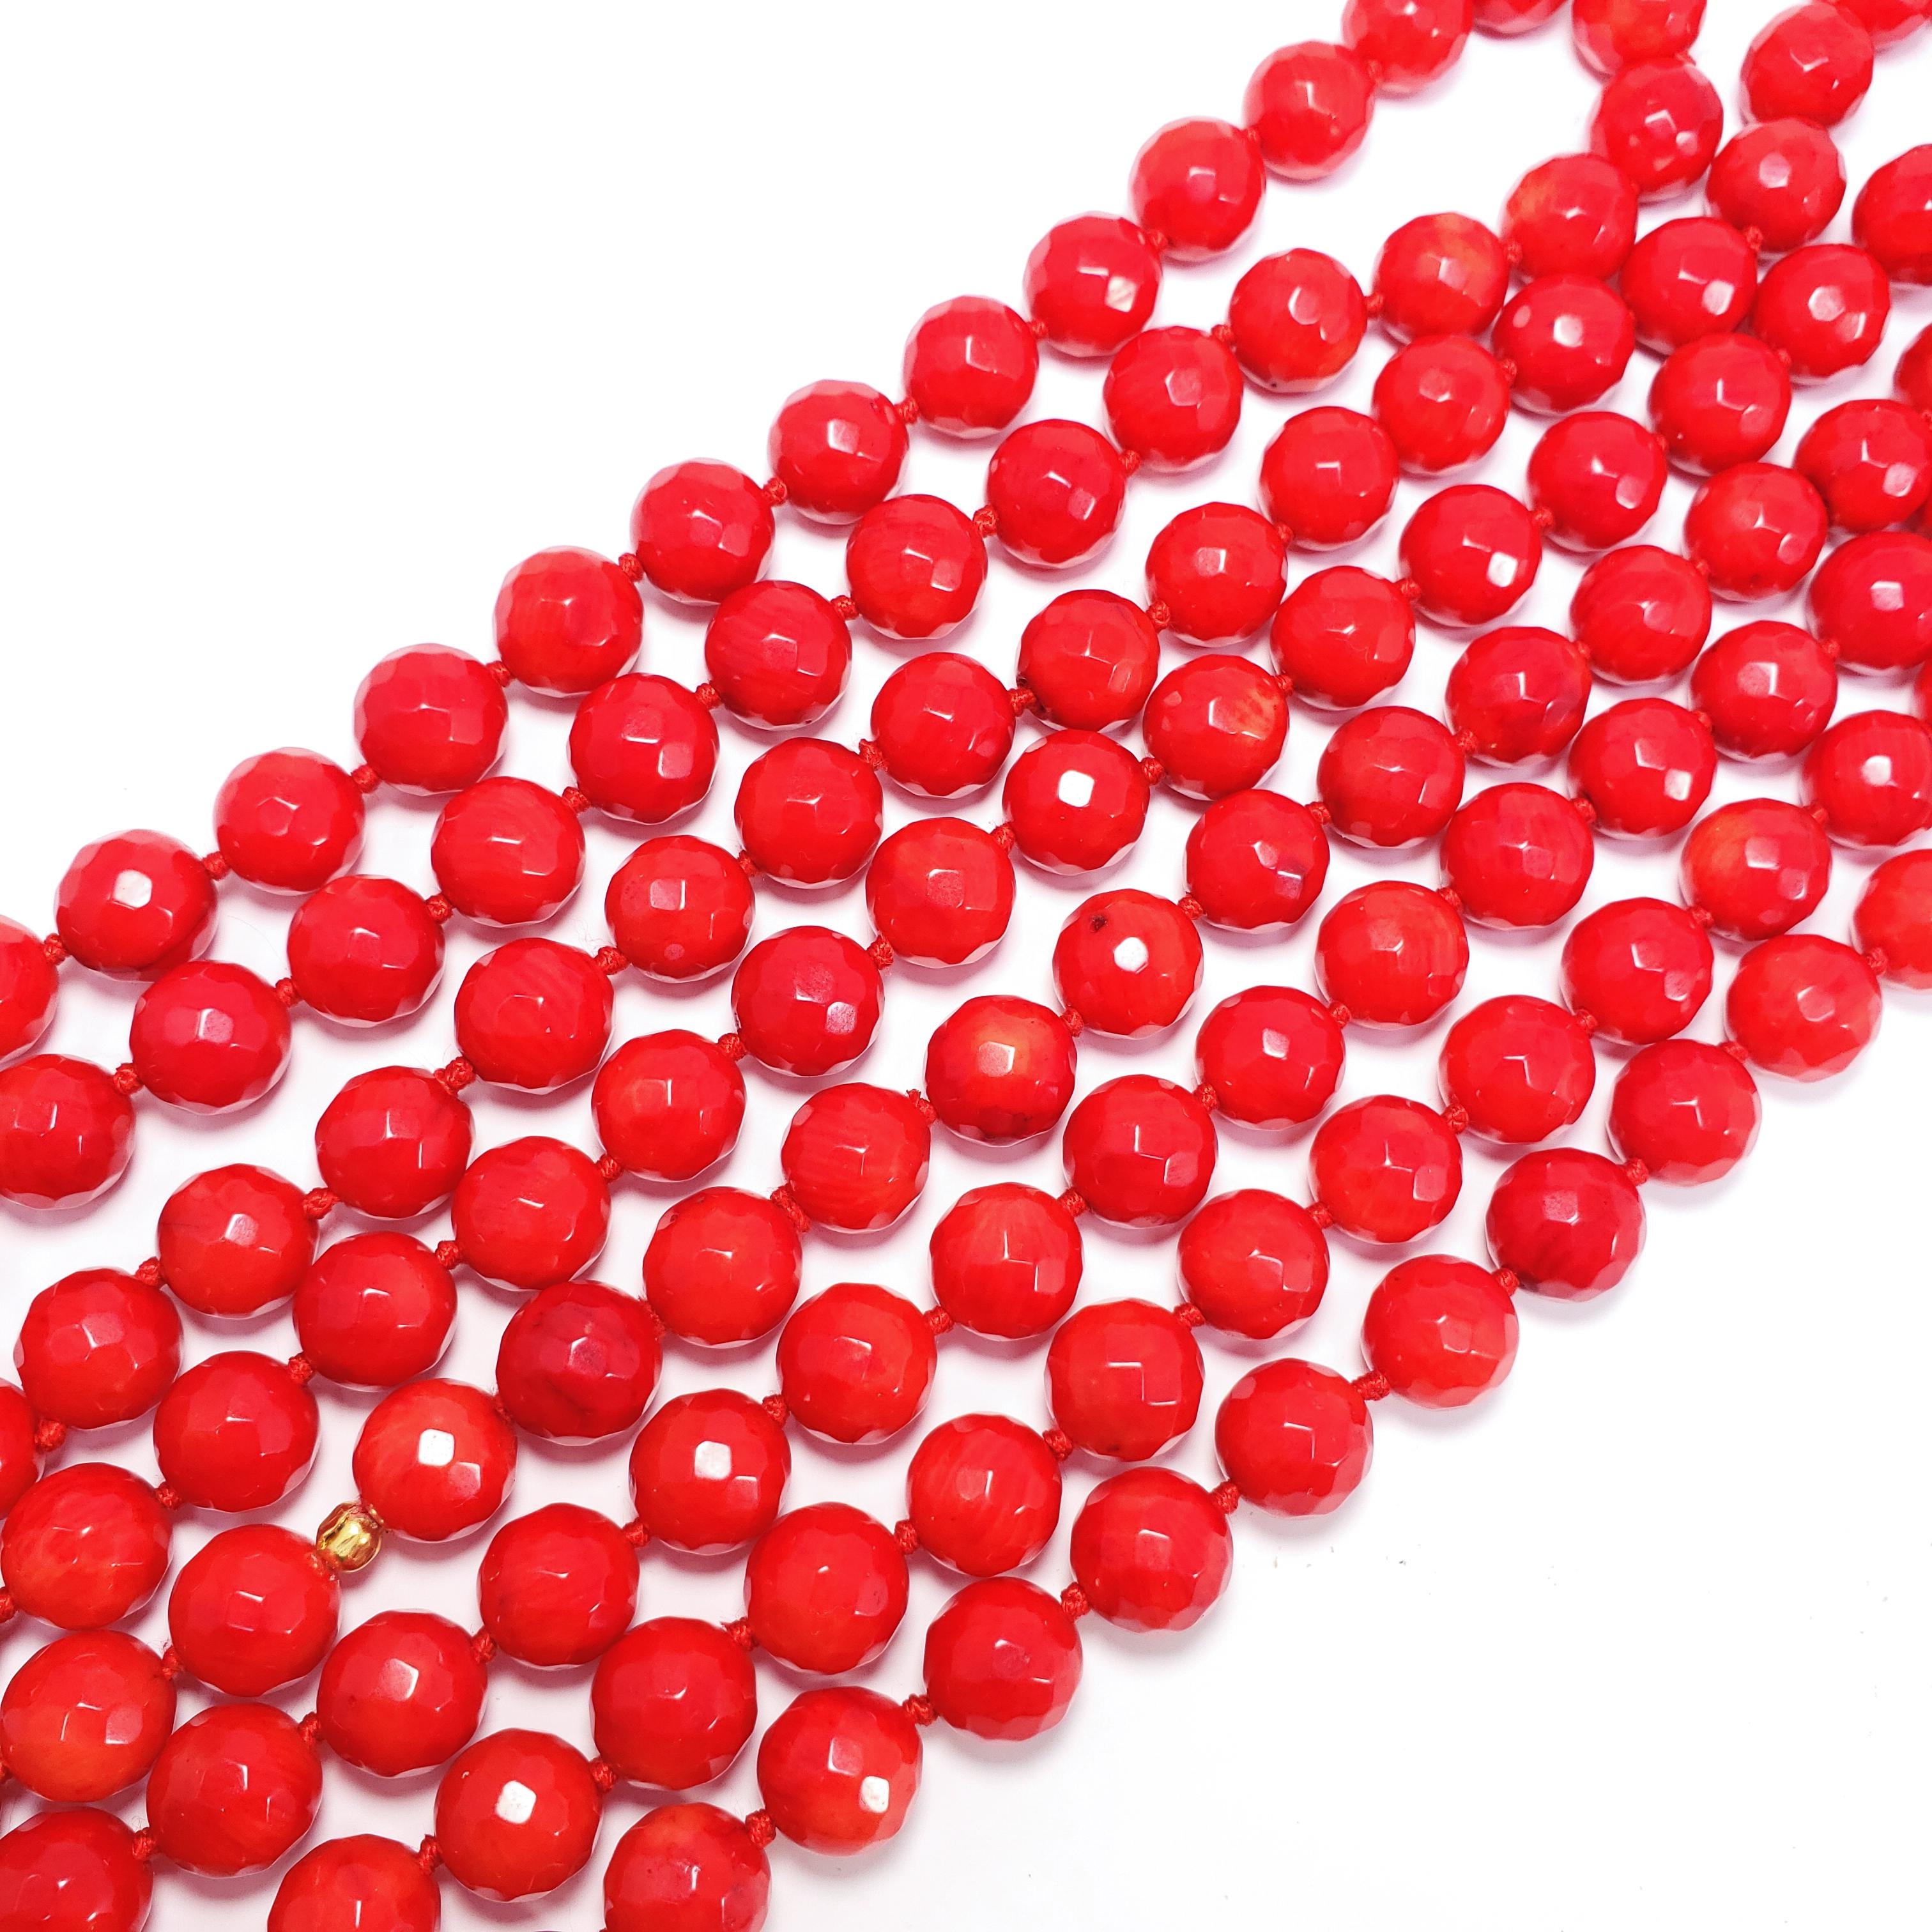 A gorgeous, bright-red coral necklace featuring faceted sea coral beads on a matching knotted red string, accented with a single yellow gold motif. This necklace is an impressive 70 inch/178 cm around. A striking yet versatile accessory perfect for